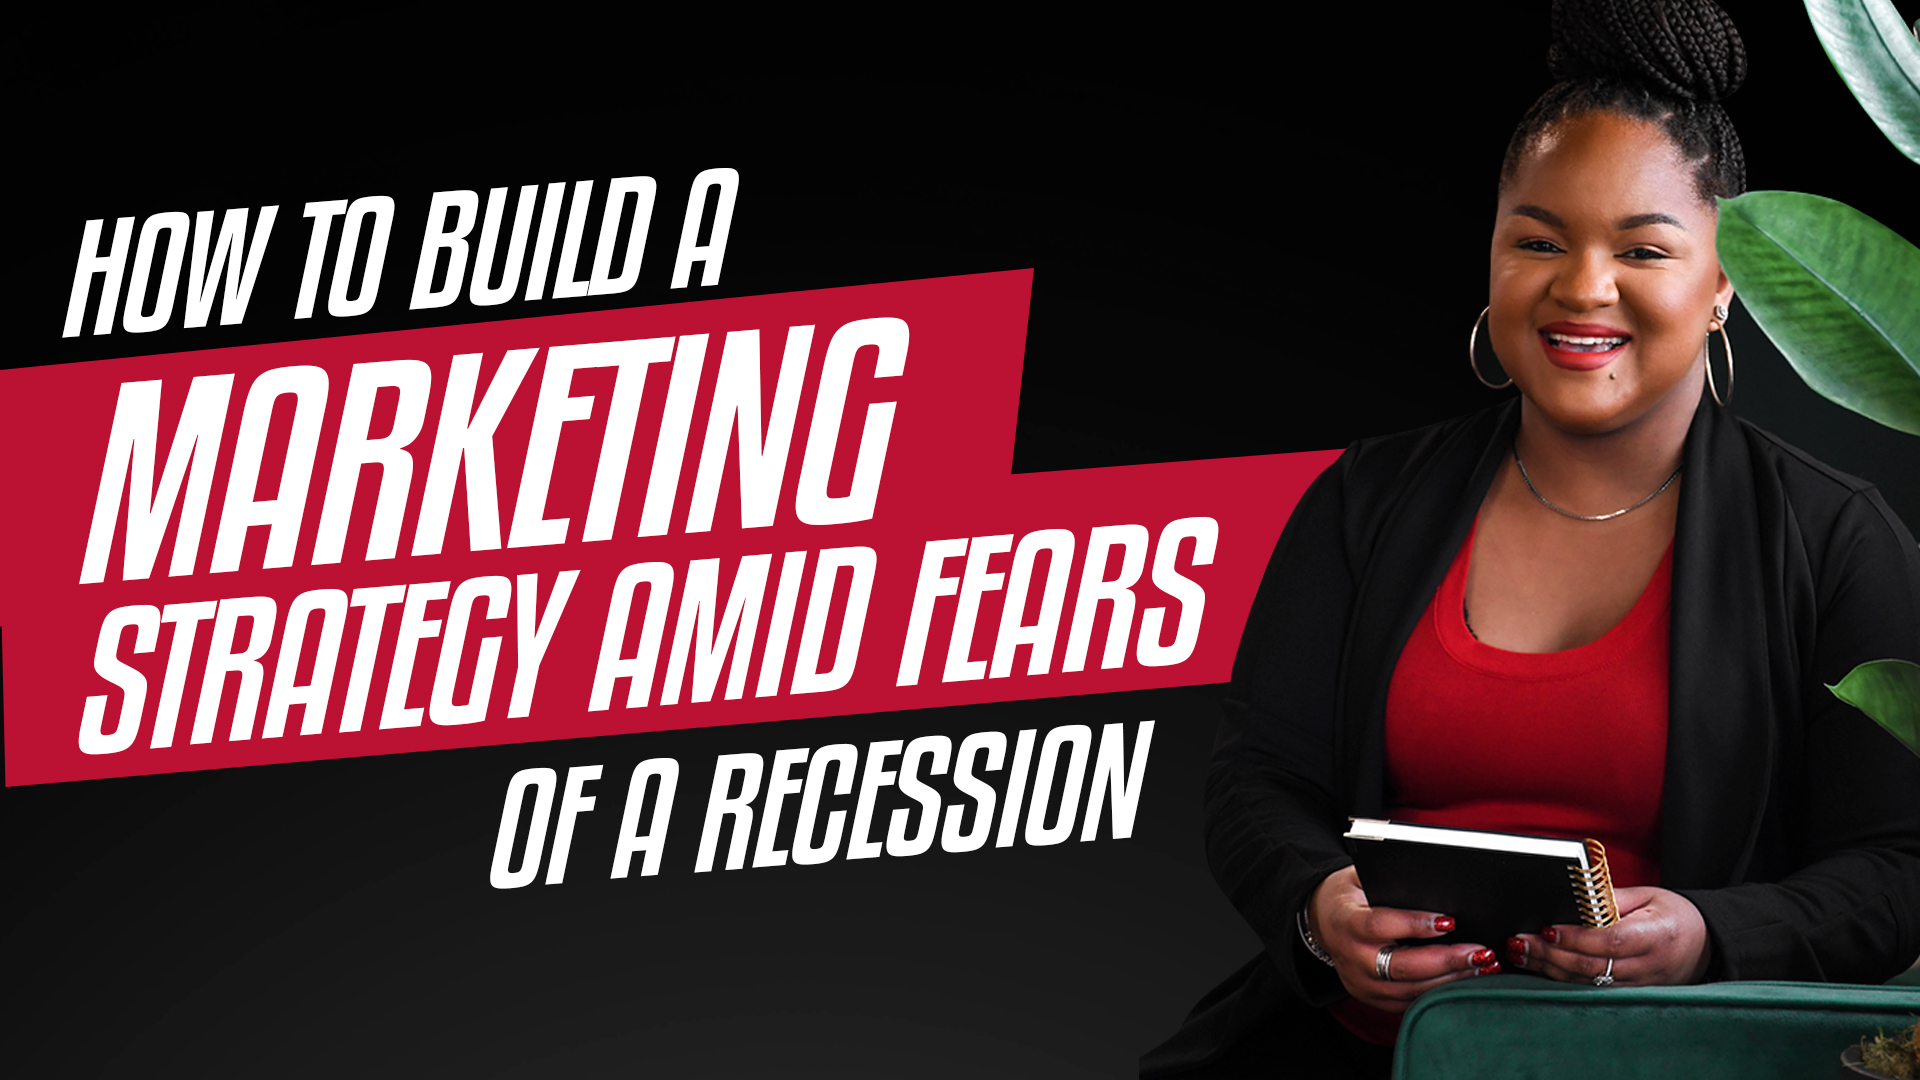 Episode #3: How to Build a Marketing Strategy Amid Fears of a Recession